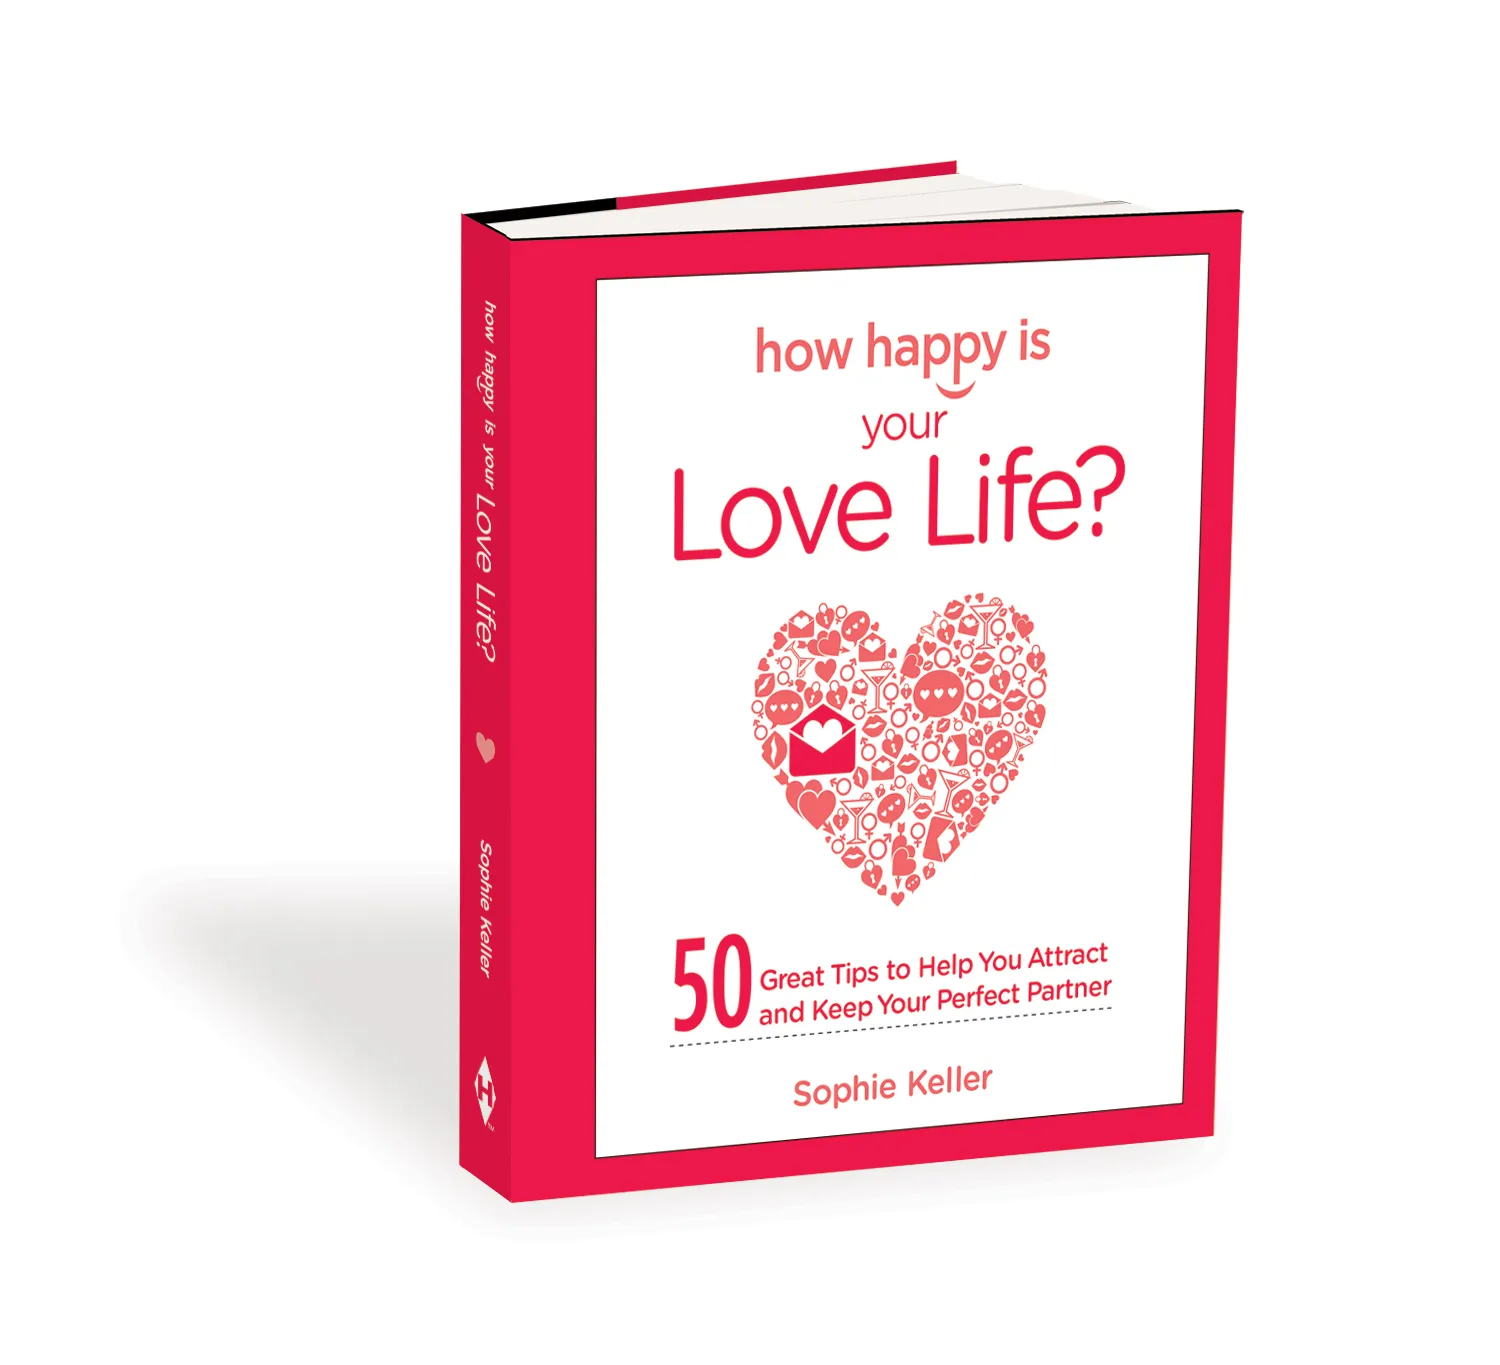 How Happy is Your Love Life? 50 Great Tips to Help You Attract and Keep the Perfect Partner